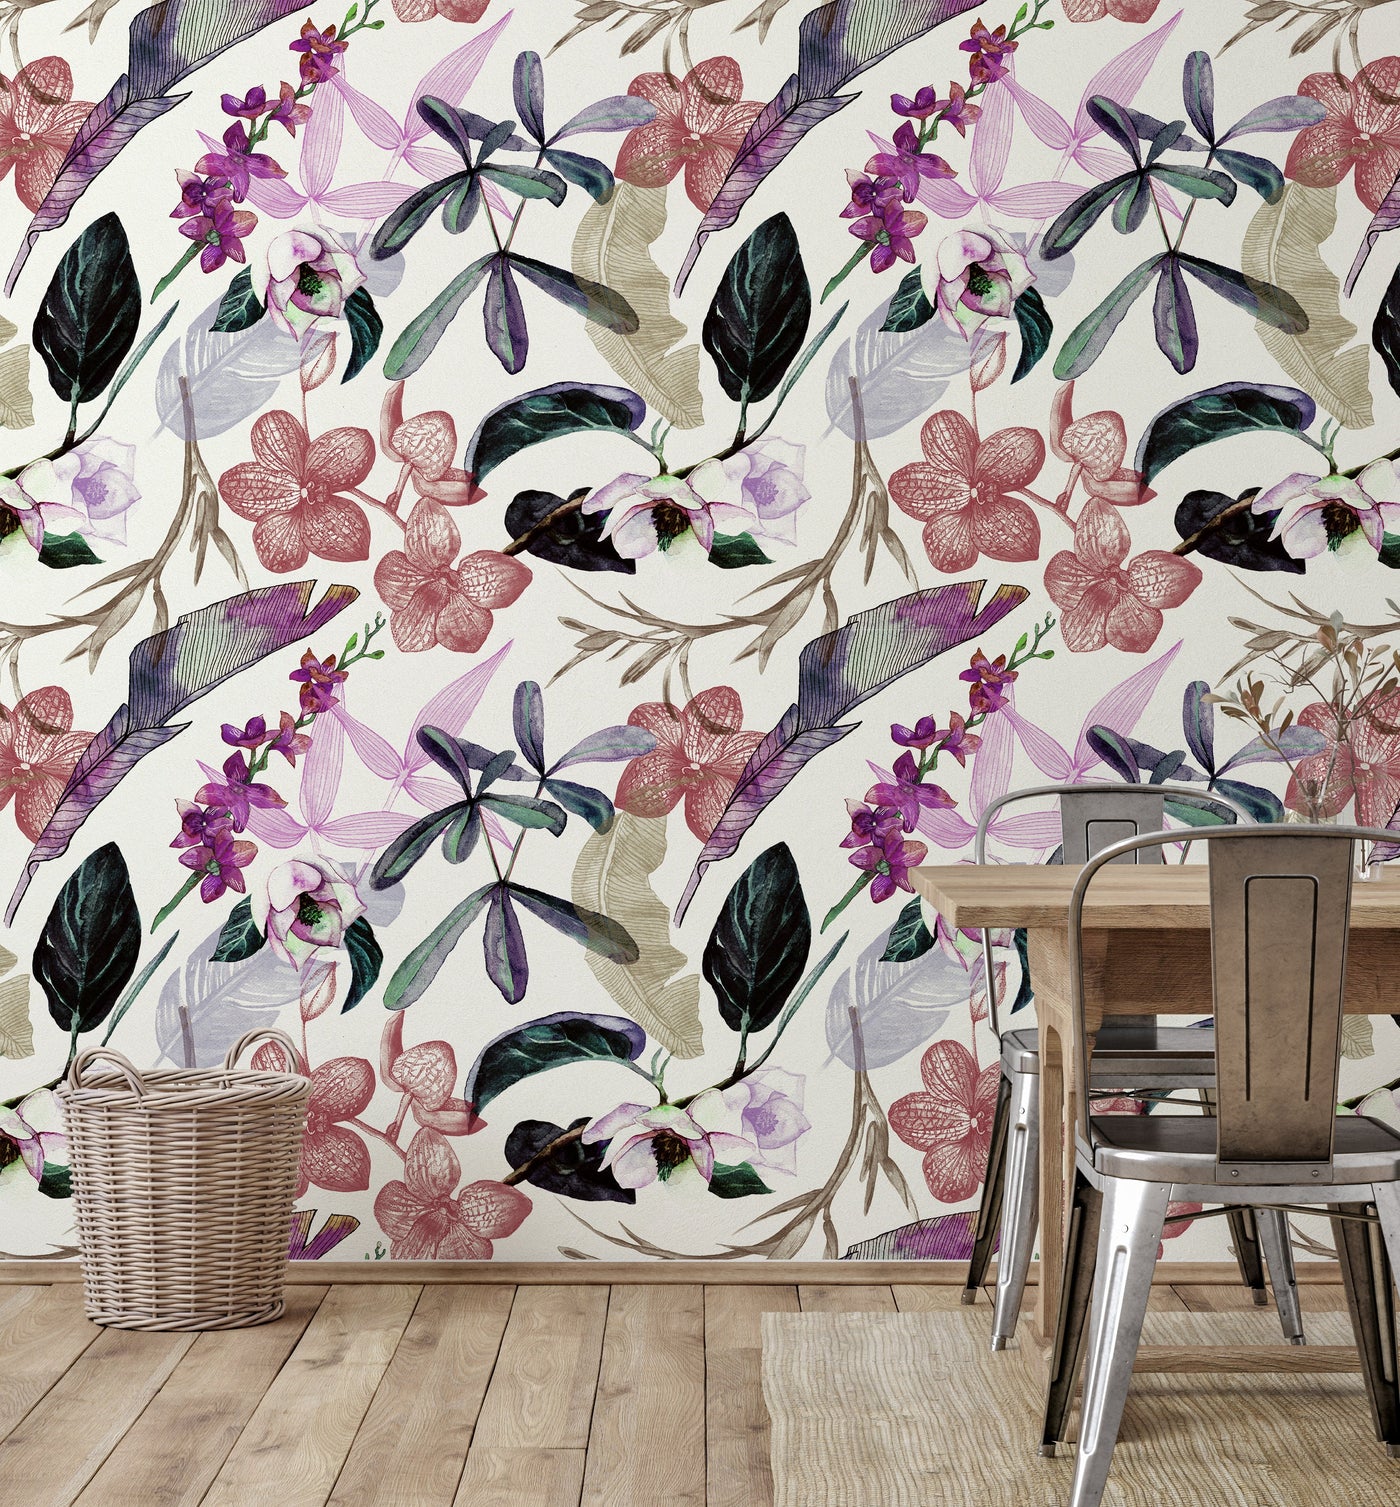 Purple Tropical Floral Wallpaper | Removable Wallpaper | Peel And Stick ...